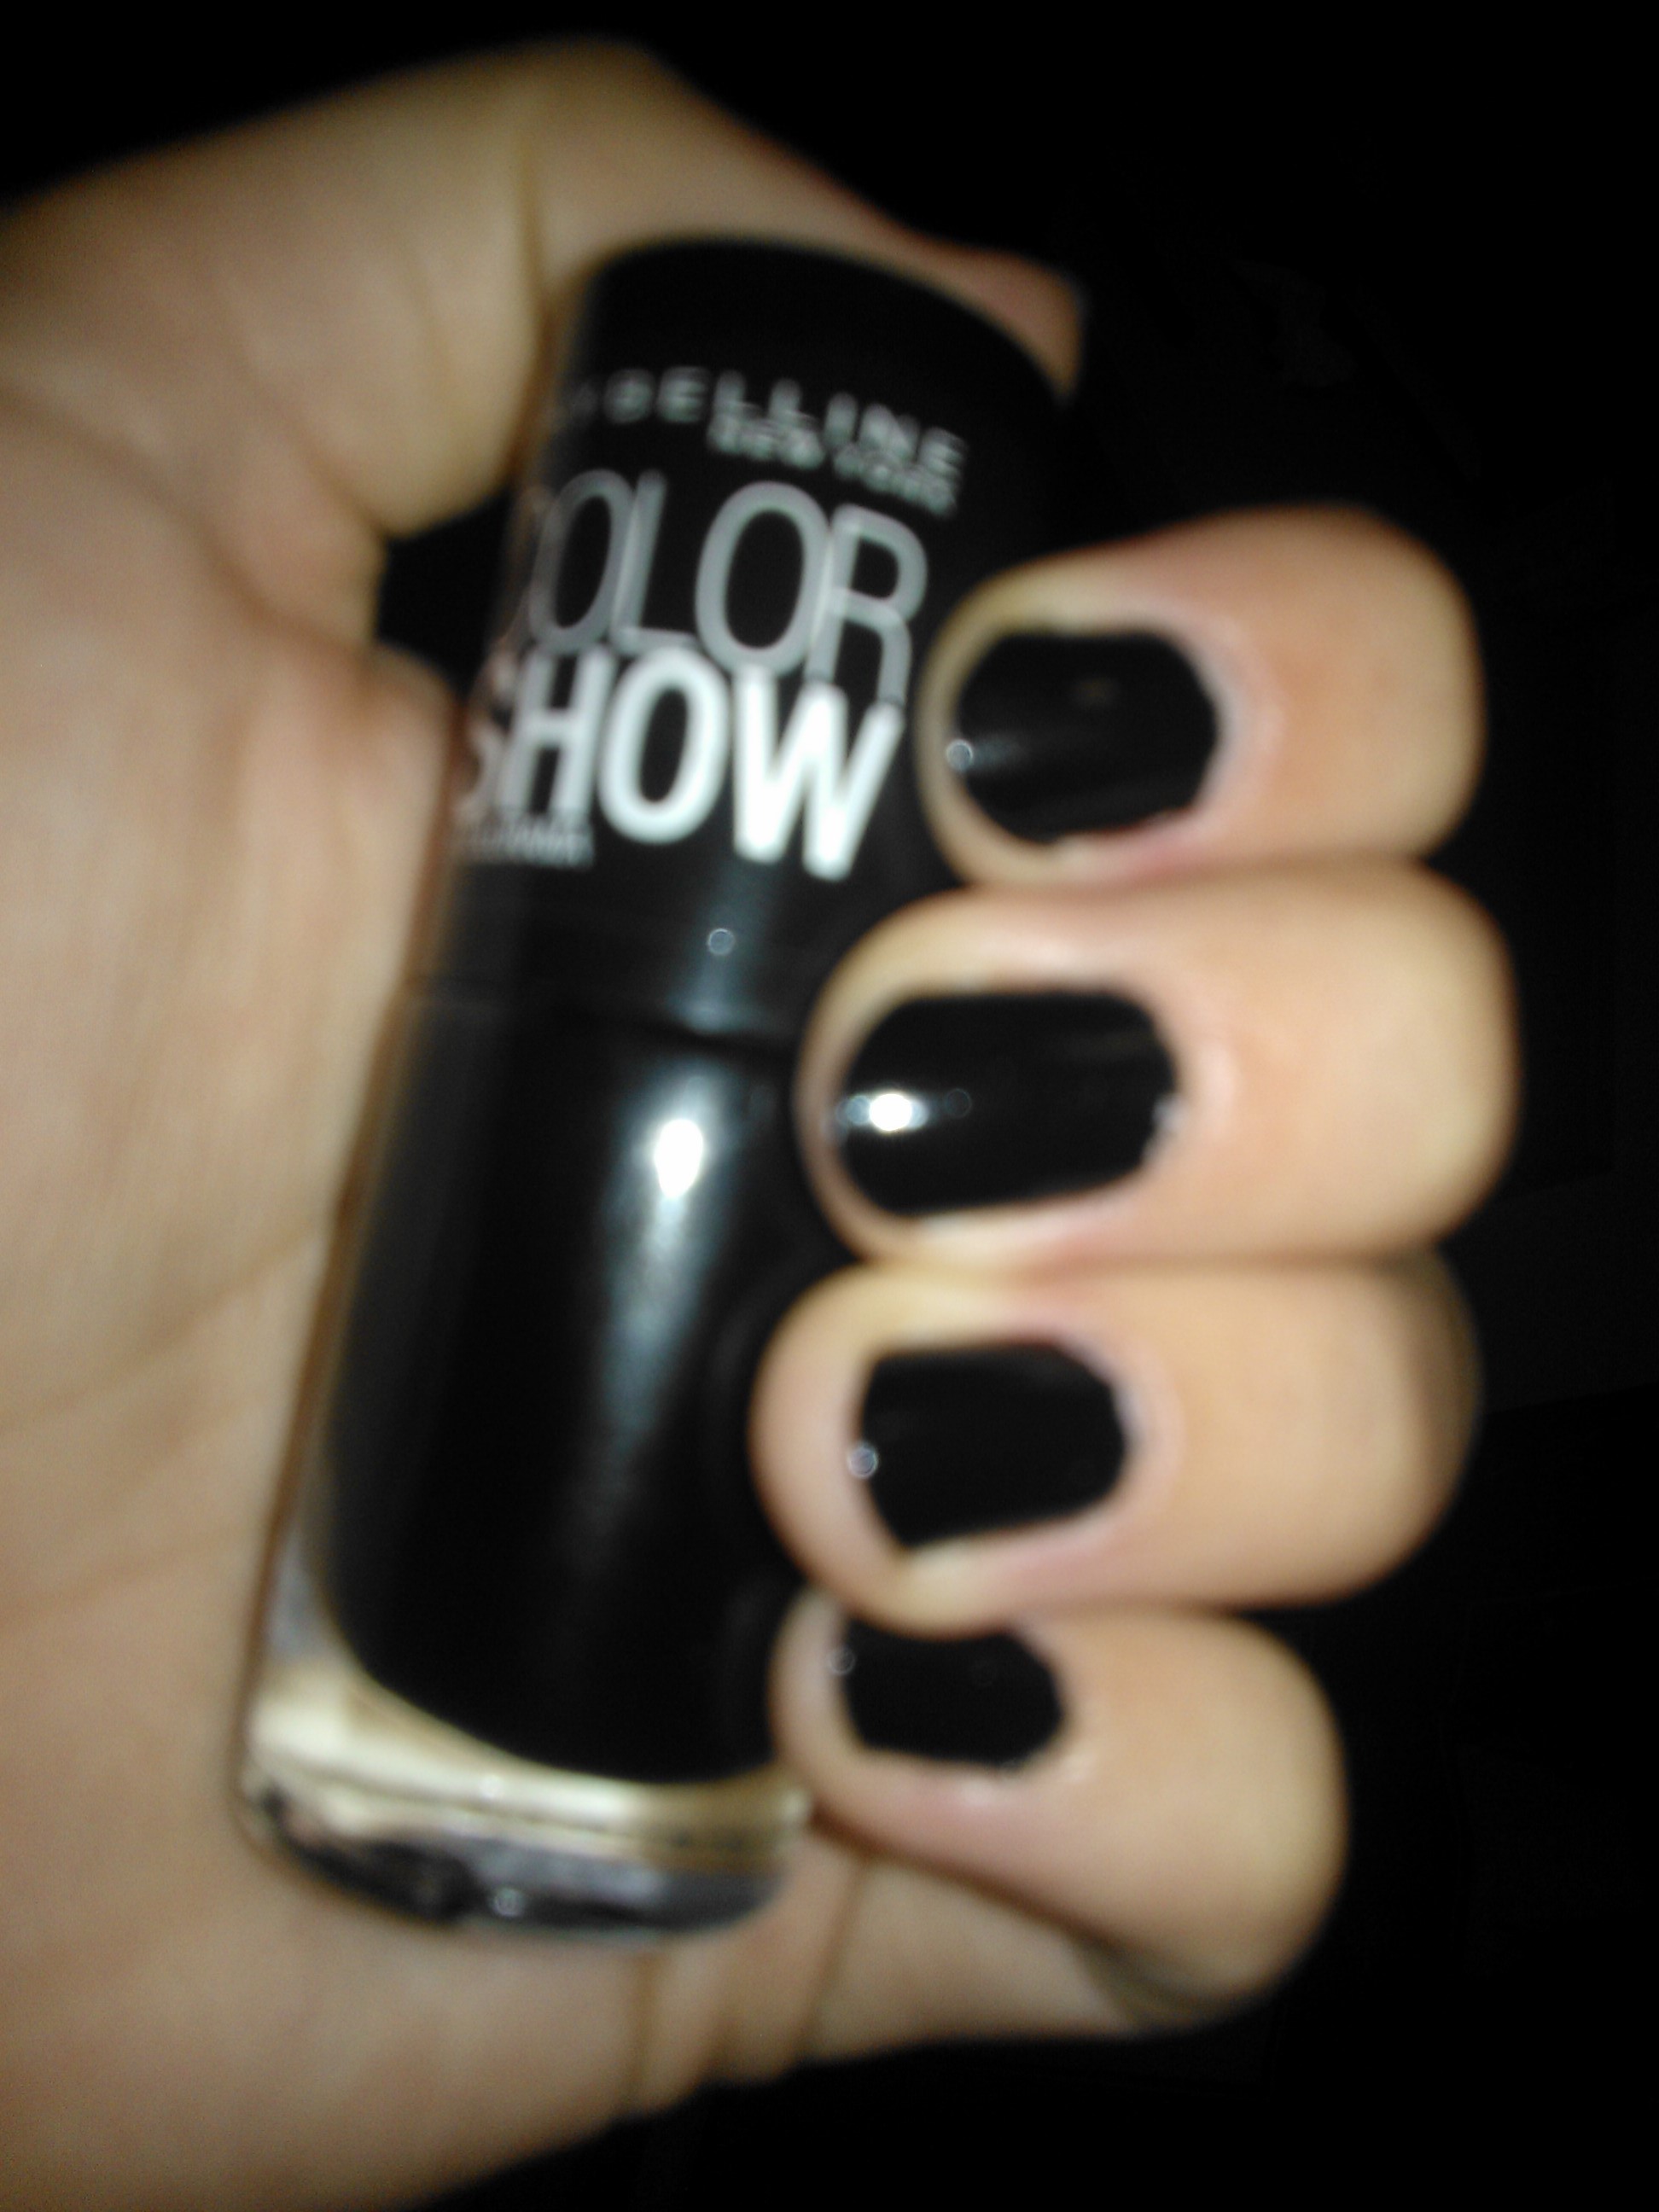 A Kiss on the Maybelline Polish New | Black Color Hand: Show by Beauty Beauty Nail Beauty York